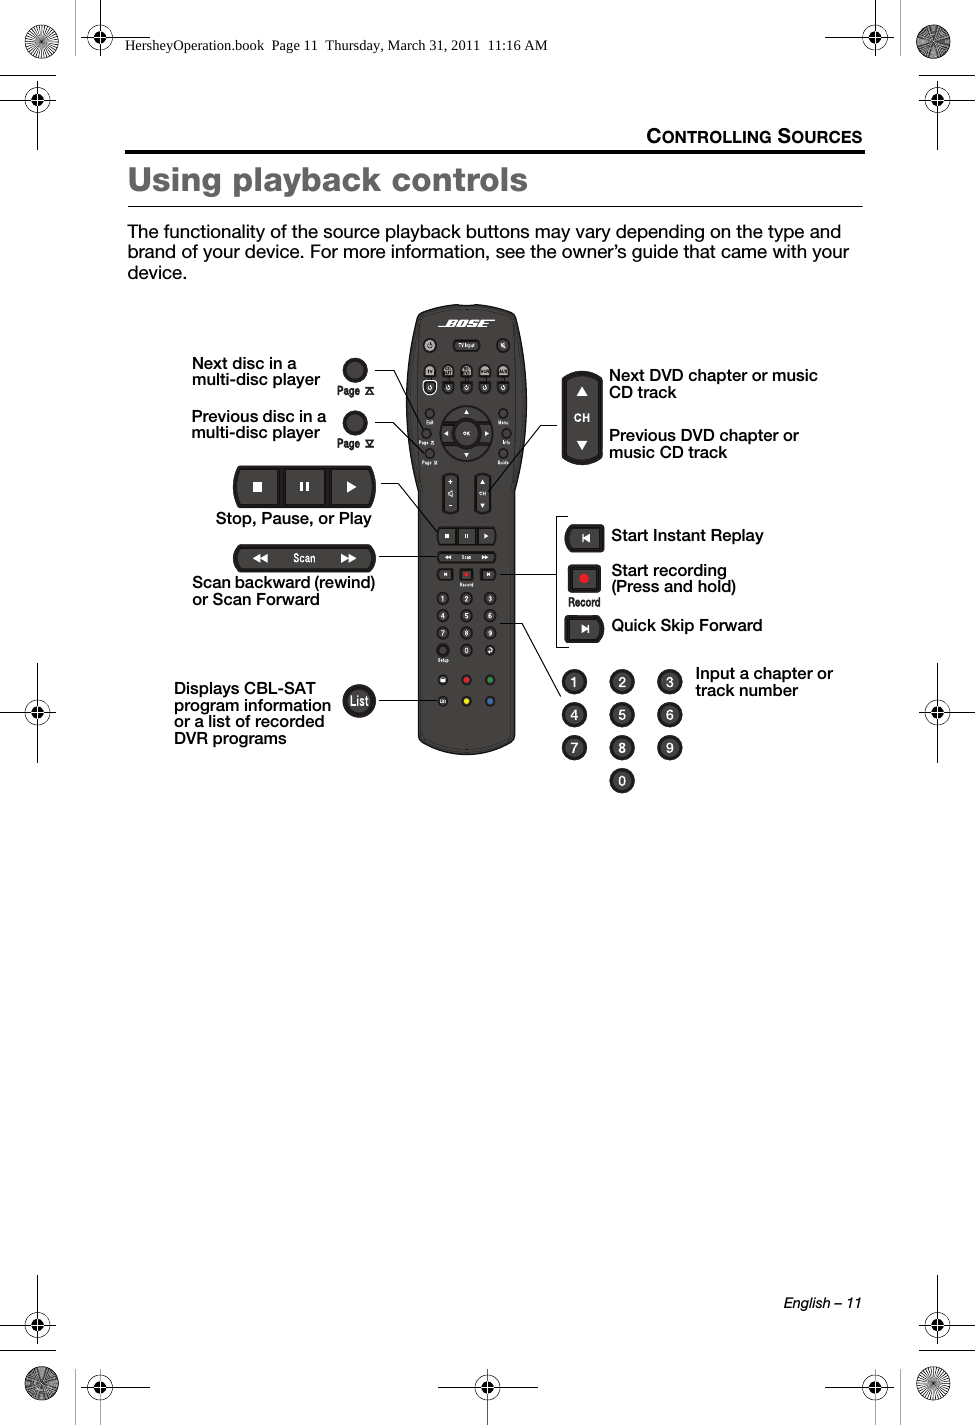 English – 11CONTROLLING SOURCESUsing playback controlsThe functionality of the source playback buttons may vary depending on the type and brand of your device. For more information, see the owner’s guide that came with your device.Next DVD chapter or music CD trackStop, Pause, or Play Start Instant ReplayScan backward (rewind) or Scan ForwardInput a chapter or track numberDisplays CBL-SAT program information or a list of recorded DVR programsStart recording (Press and hold)Quick Skip ForwardPrevious DVD chapter or music CD trackNext disc in a multi-disc playerPrevious disc in a multi-disc playerHersheyOperation.book  Page 11  Thursday, March 31, 2011  11:16 AM